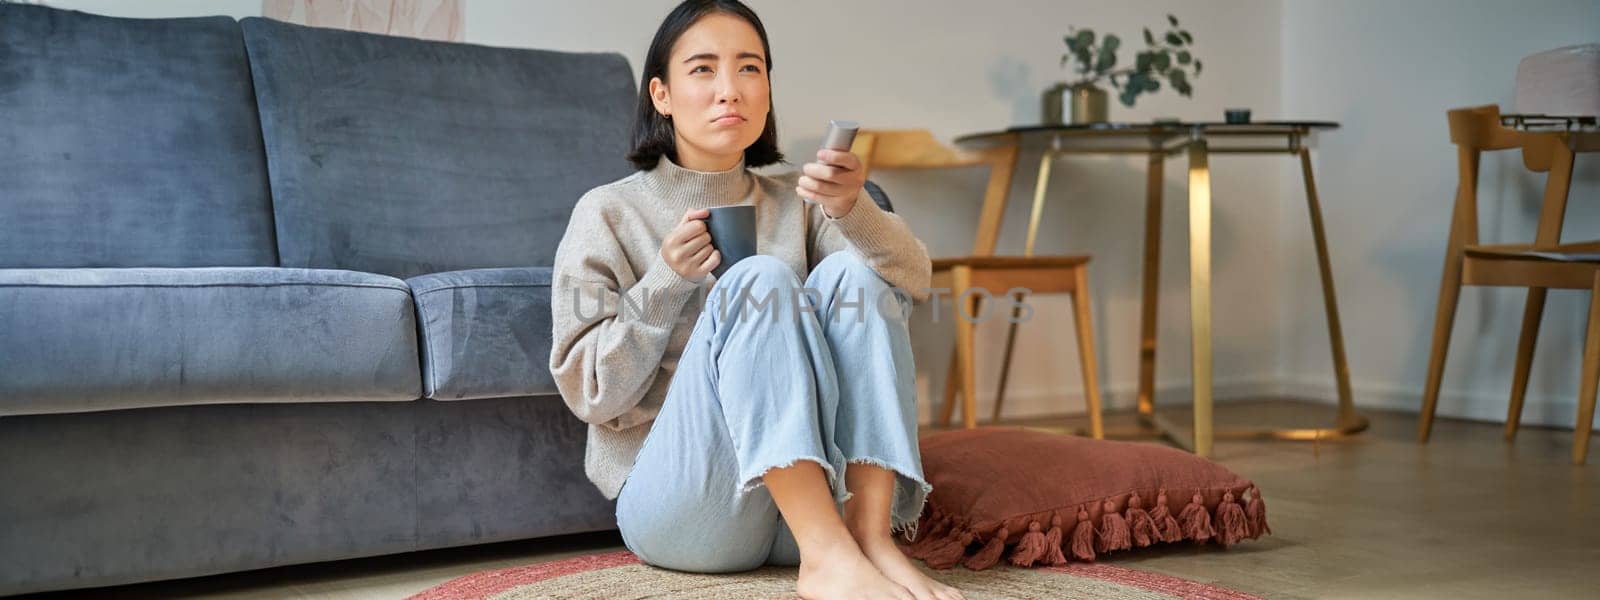 Image of young asian woman with remote, watching tv, drinking coffee, looking suspicious at television screen.